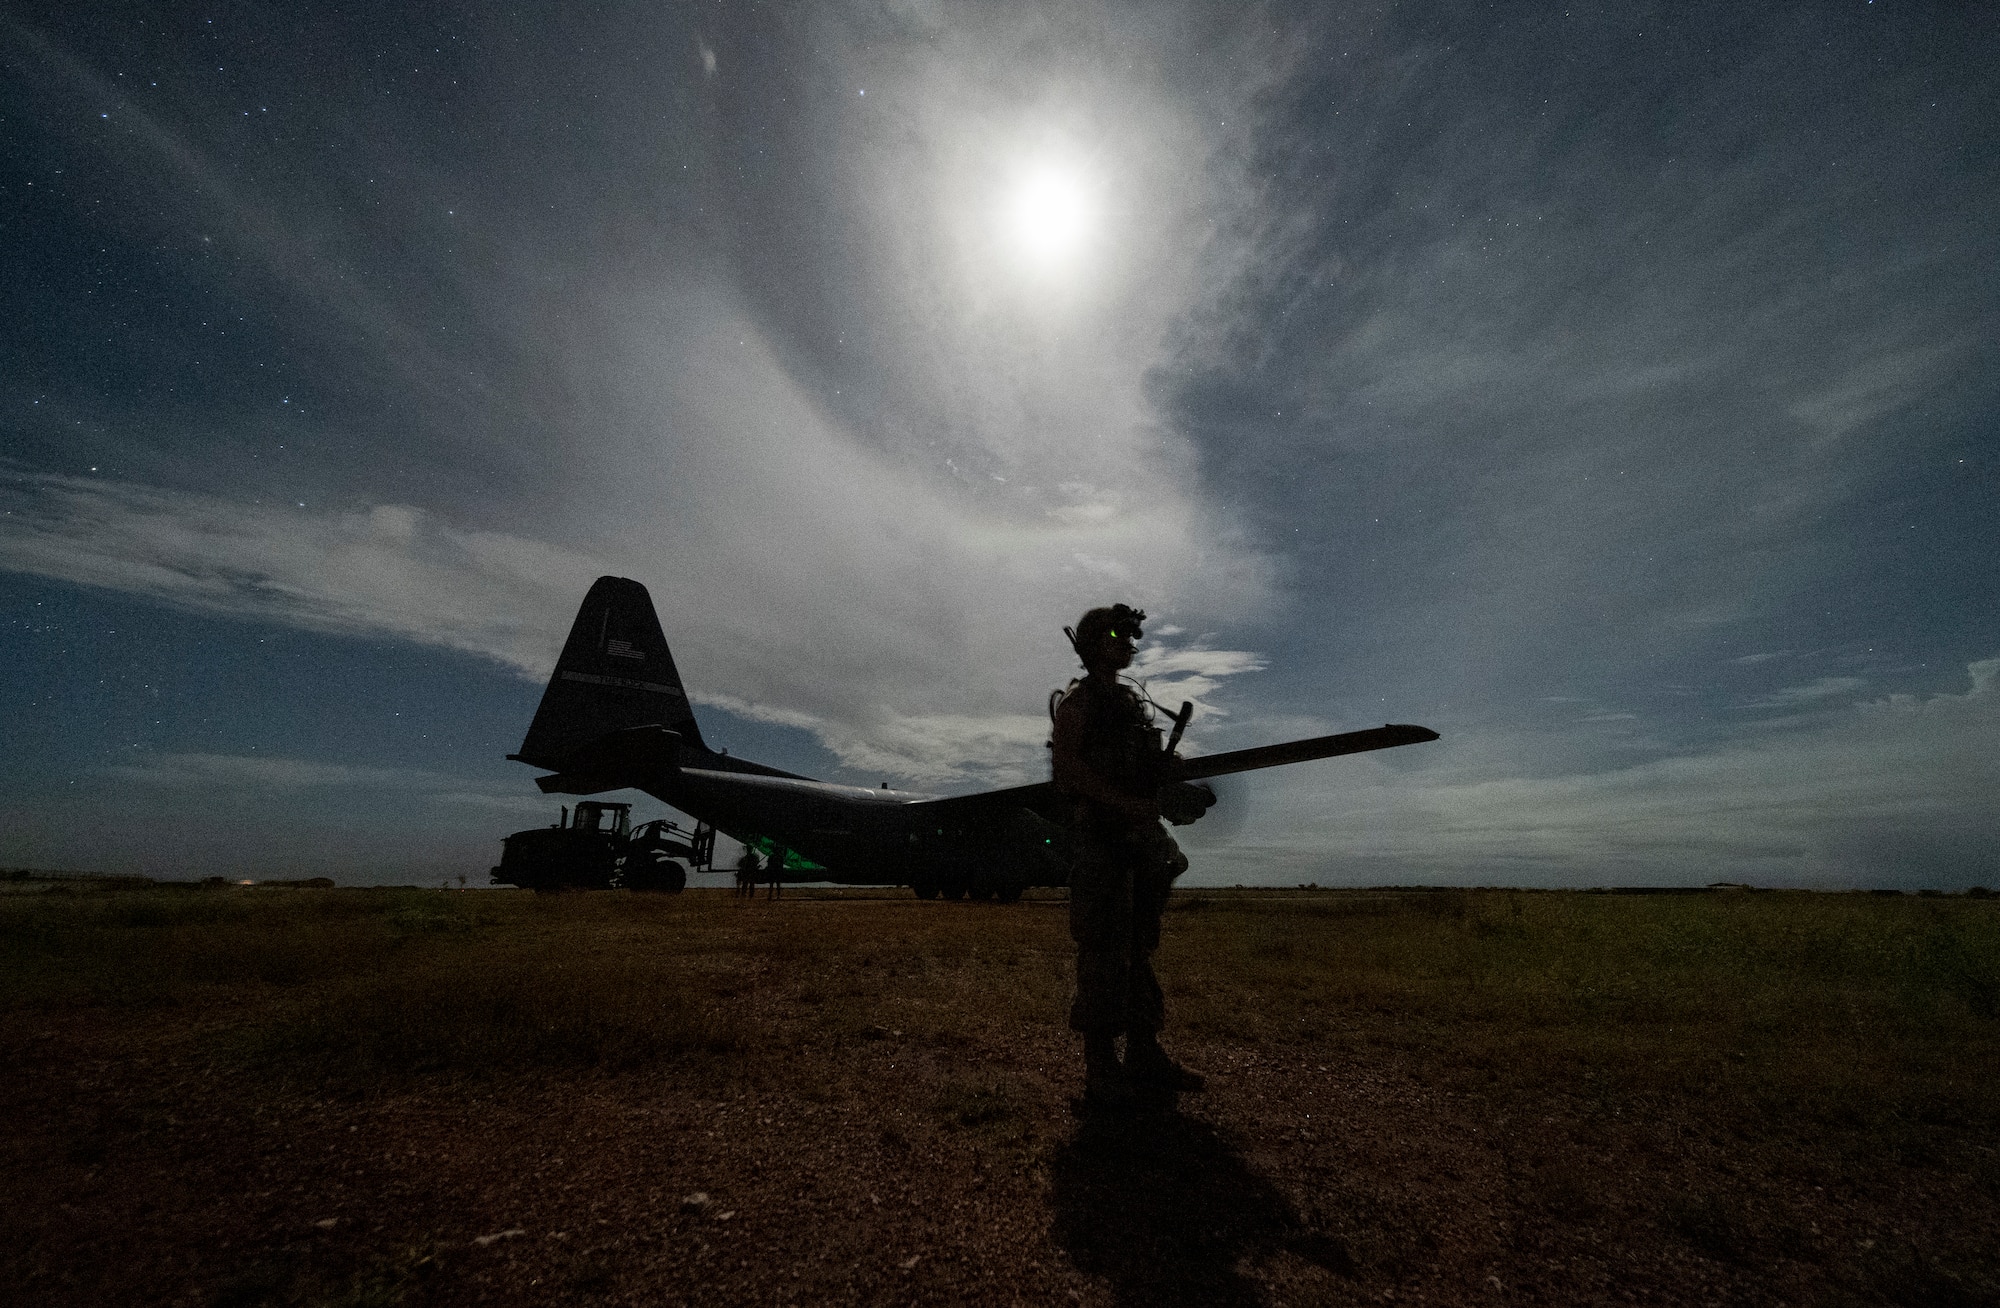 U.S. Army Spc. Alexander Nguyen, combat medic specialist, assigned to the 1-186th Infantry Battalion, Task Force Guardian, Combined Joint Task Force – Horn of Africa (CJTF-HOA), provides security for a 75th Expeditionary Airlift Squadron (EAS) C-130J Super Hercules during unloading operations in Somalia, June 28, 2020. Task Force Guardian provides base security and force protection for CJFT-HOA personnel and U.S. partner forces deployed in the region. (U.S. Air Force photo by Tech. Sgt. Christopher Ruano)